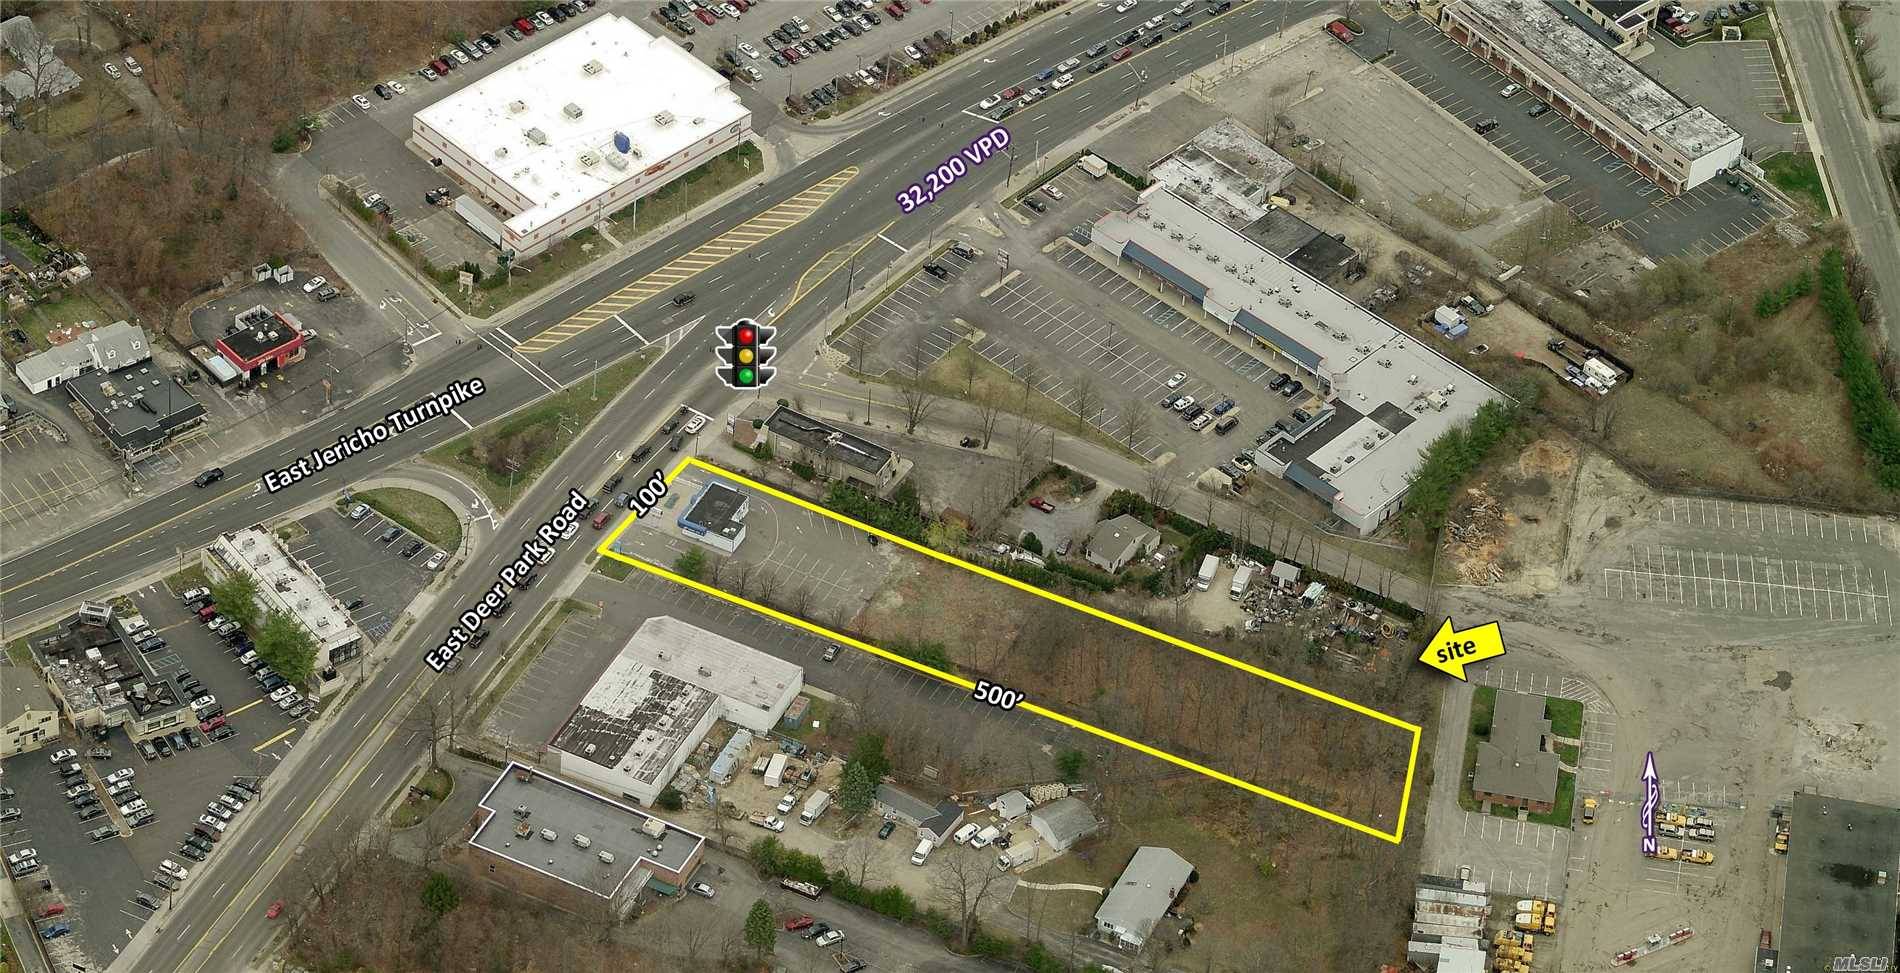 Prime Retail Development Opportunity For Sale Or Lease On Heavily Traveled East Deer Park Rd.